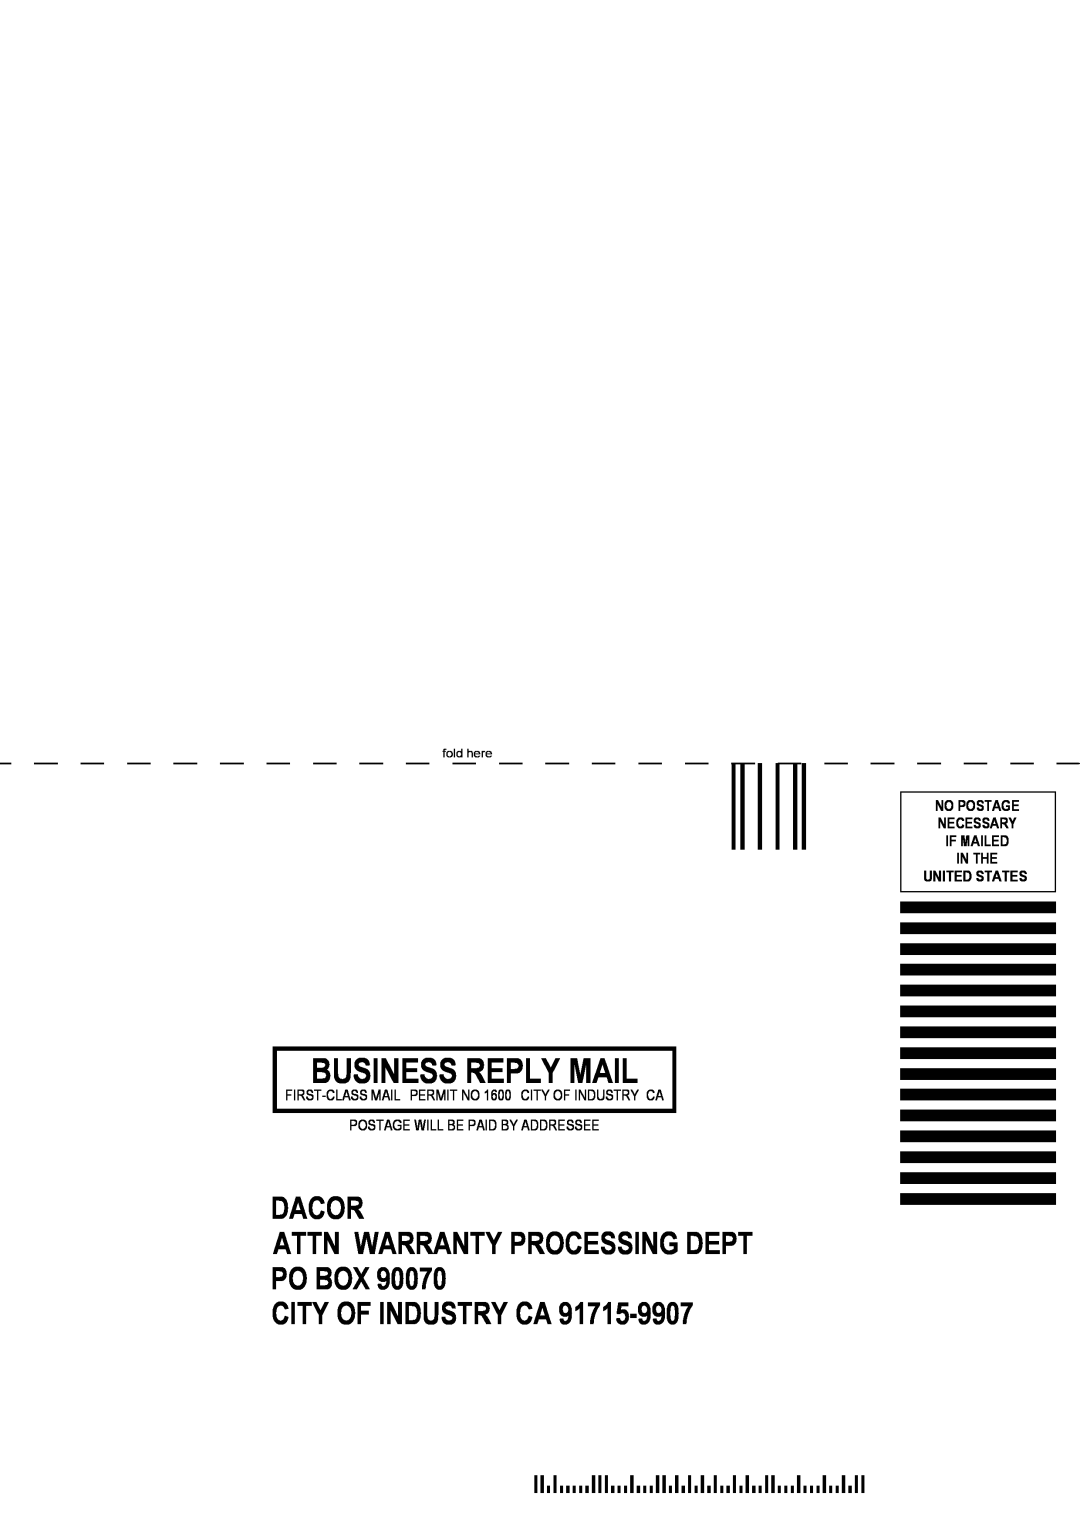 Dacor DDWF24S Business Reply Mail, Dacor Attn Warranty Processing Dept Po Box City Of Industry Ca, fold here 